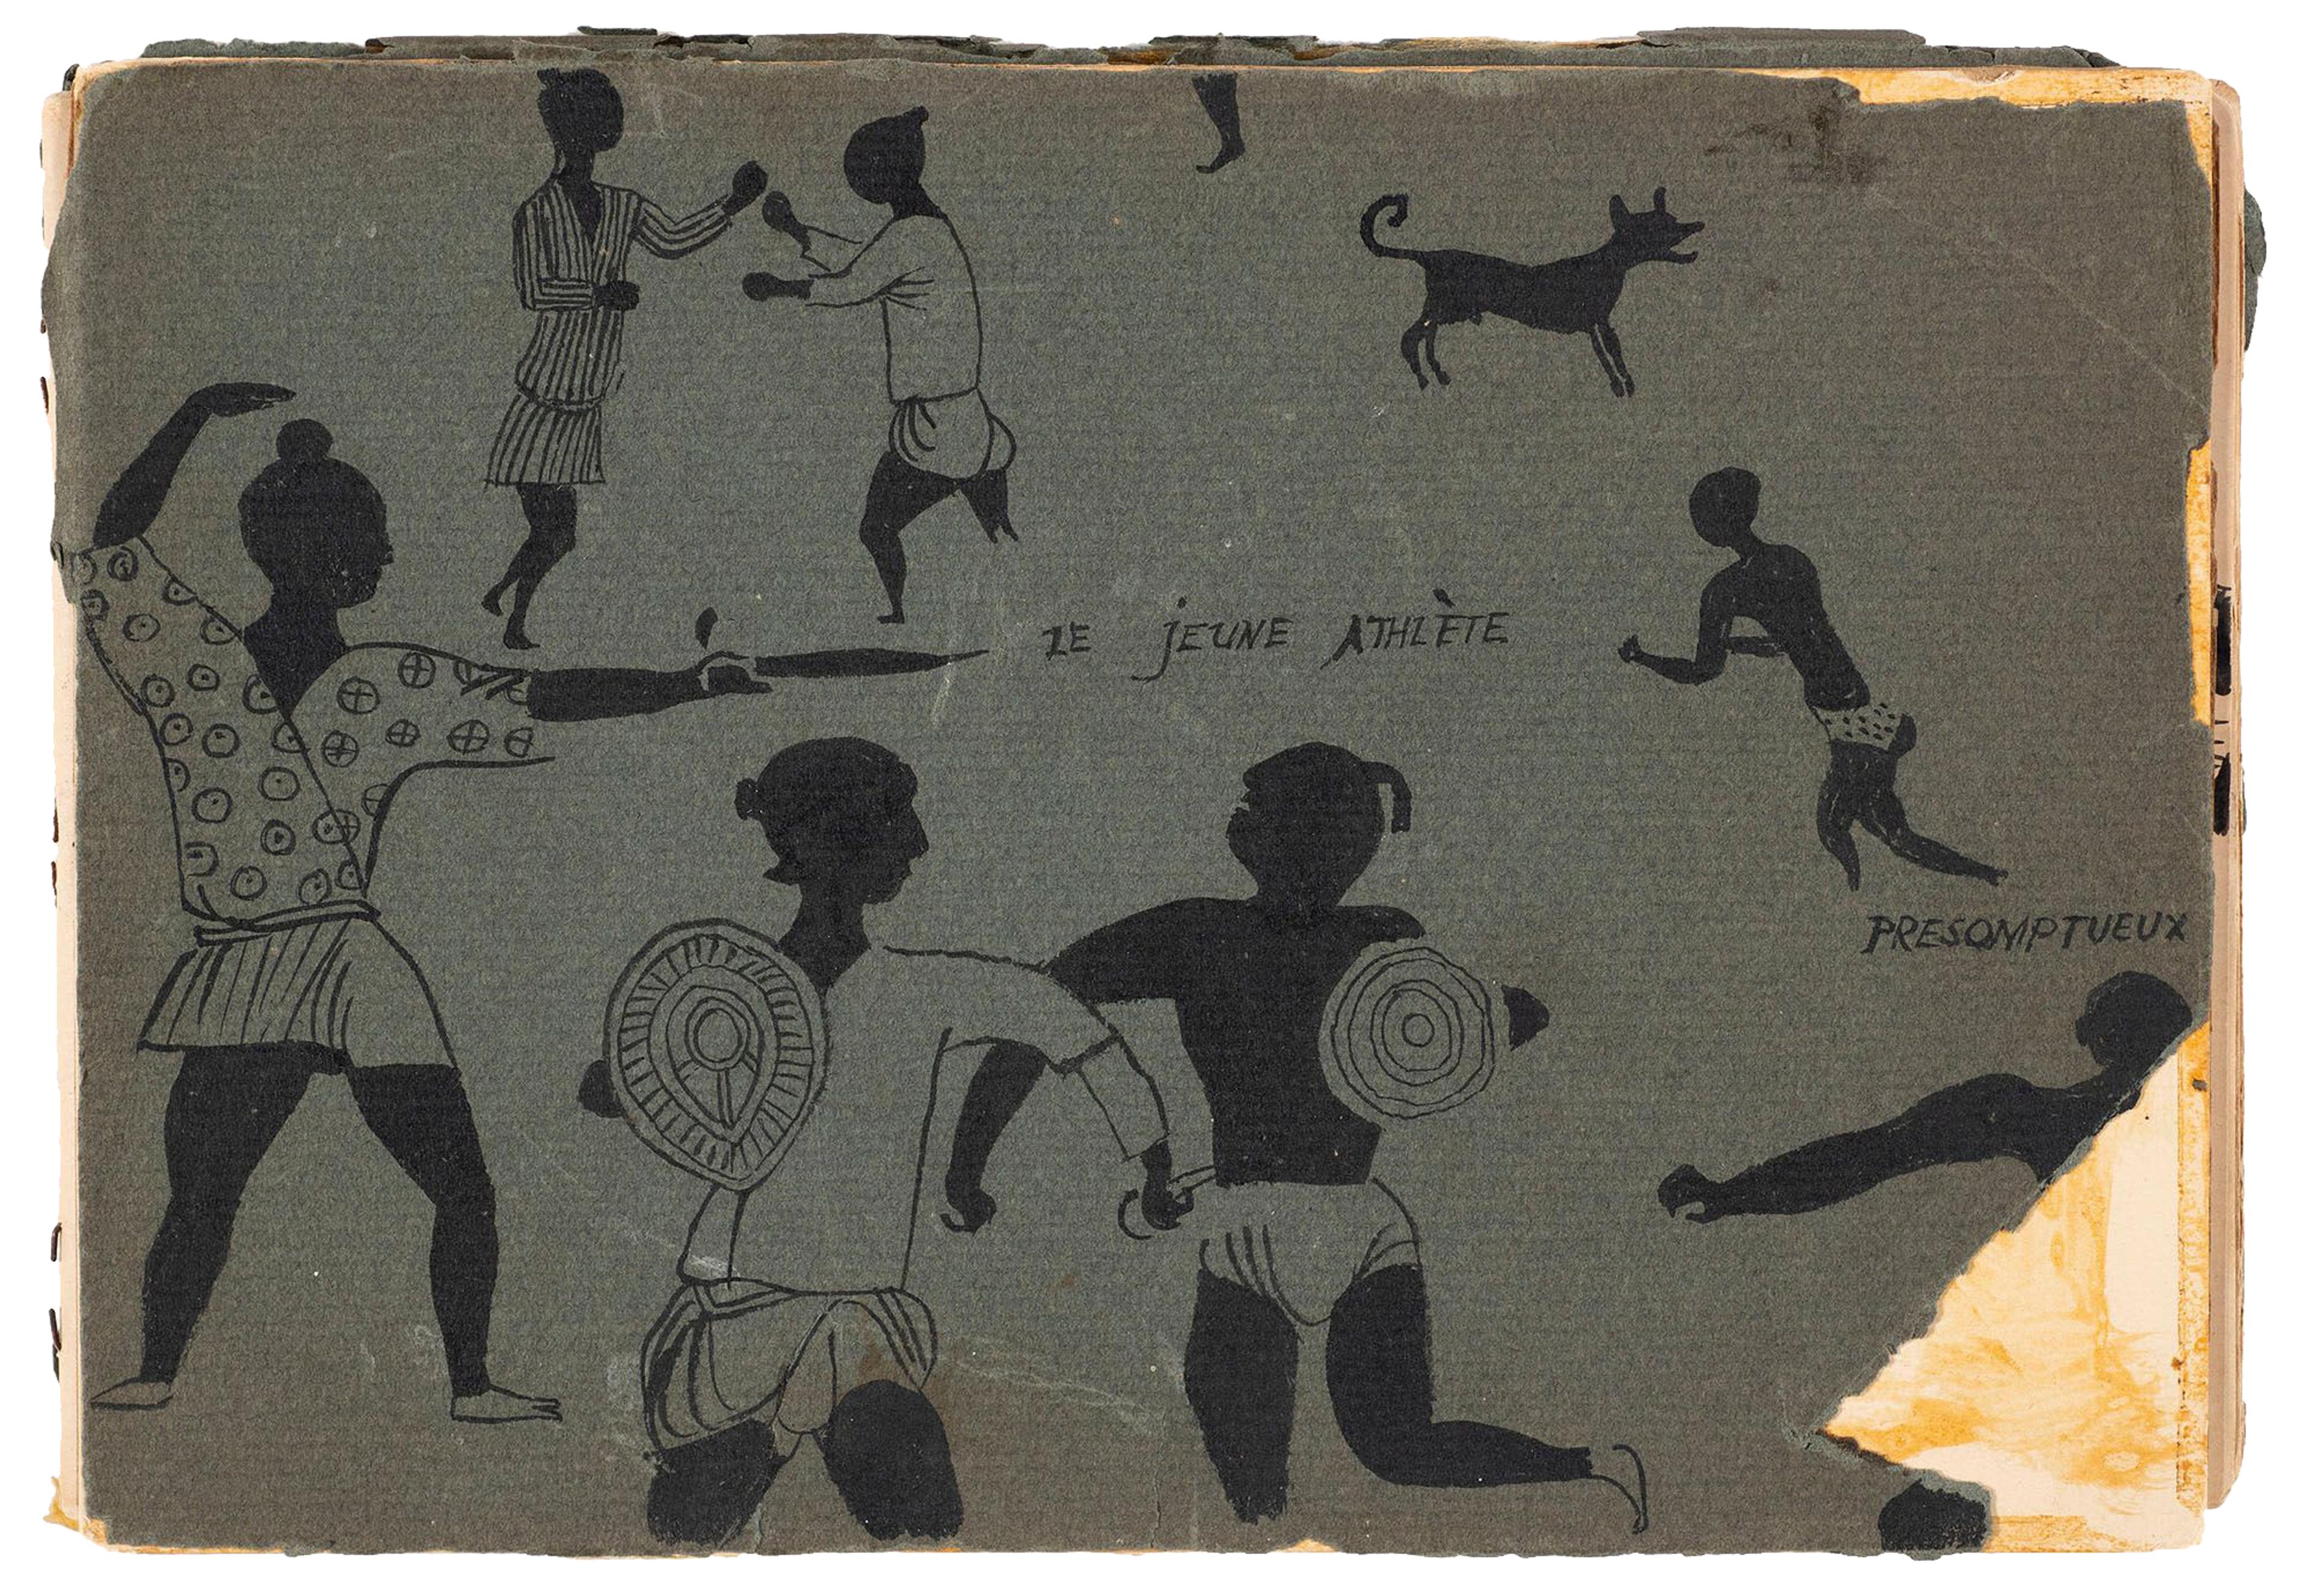 Green cover of a battered paper book with handdrawn dancing and fighting figures in black